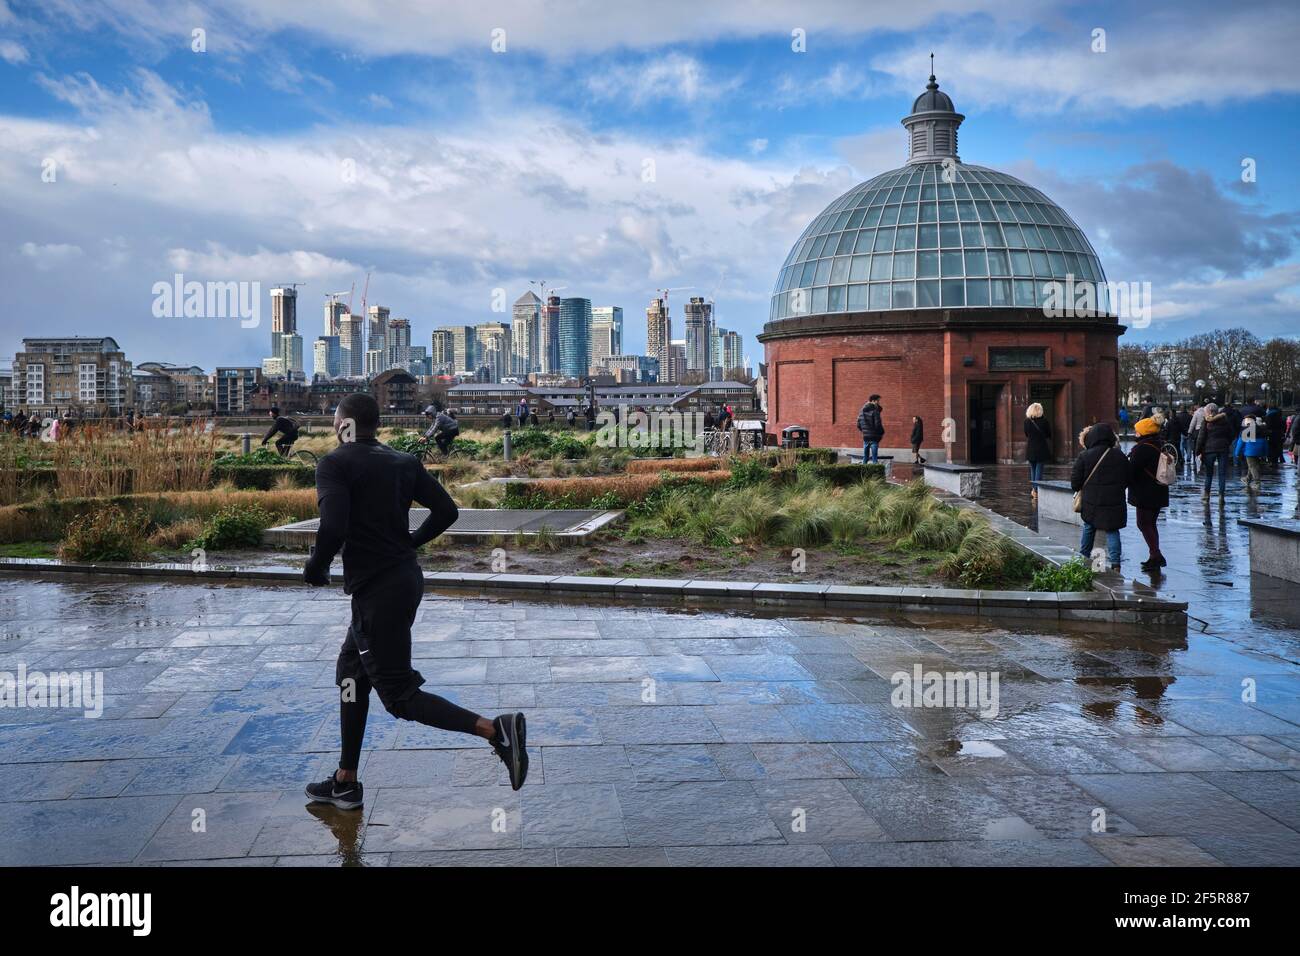 Man running on a wet pathway in Greenwich. London. Financial district Canary Wharf in the background. Stock Photo